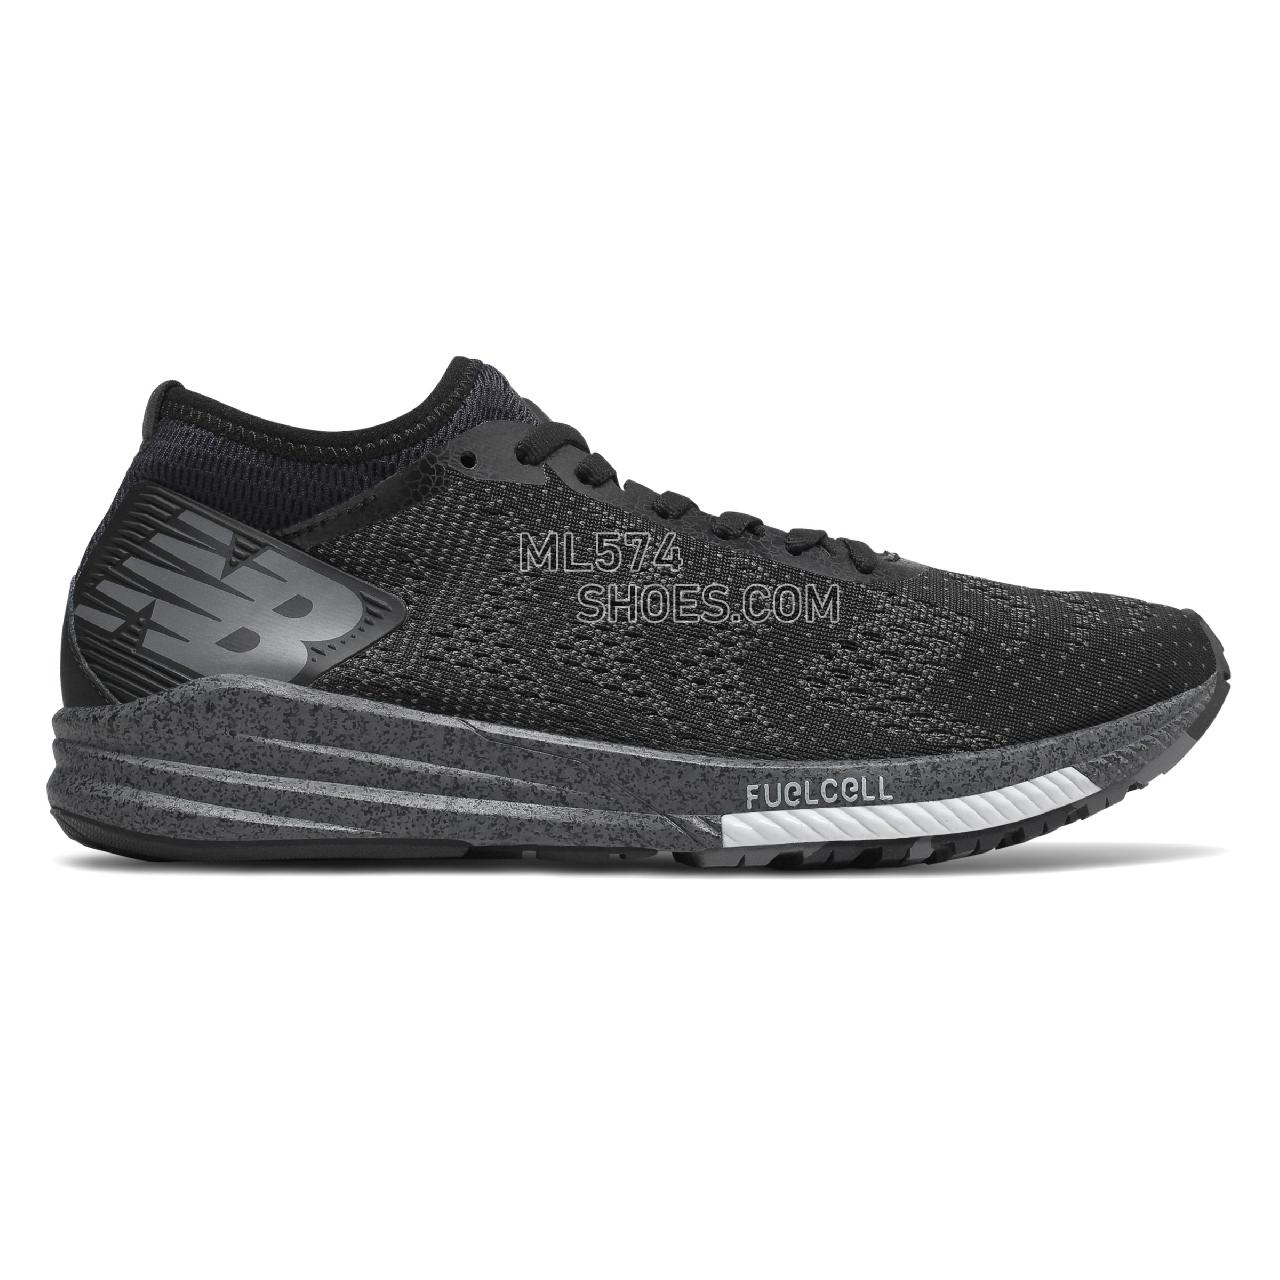 New Balance FuelCell Impulse - Women's  - Running Black with Copper - WFCIMX